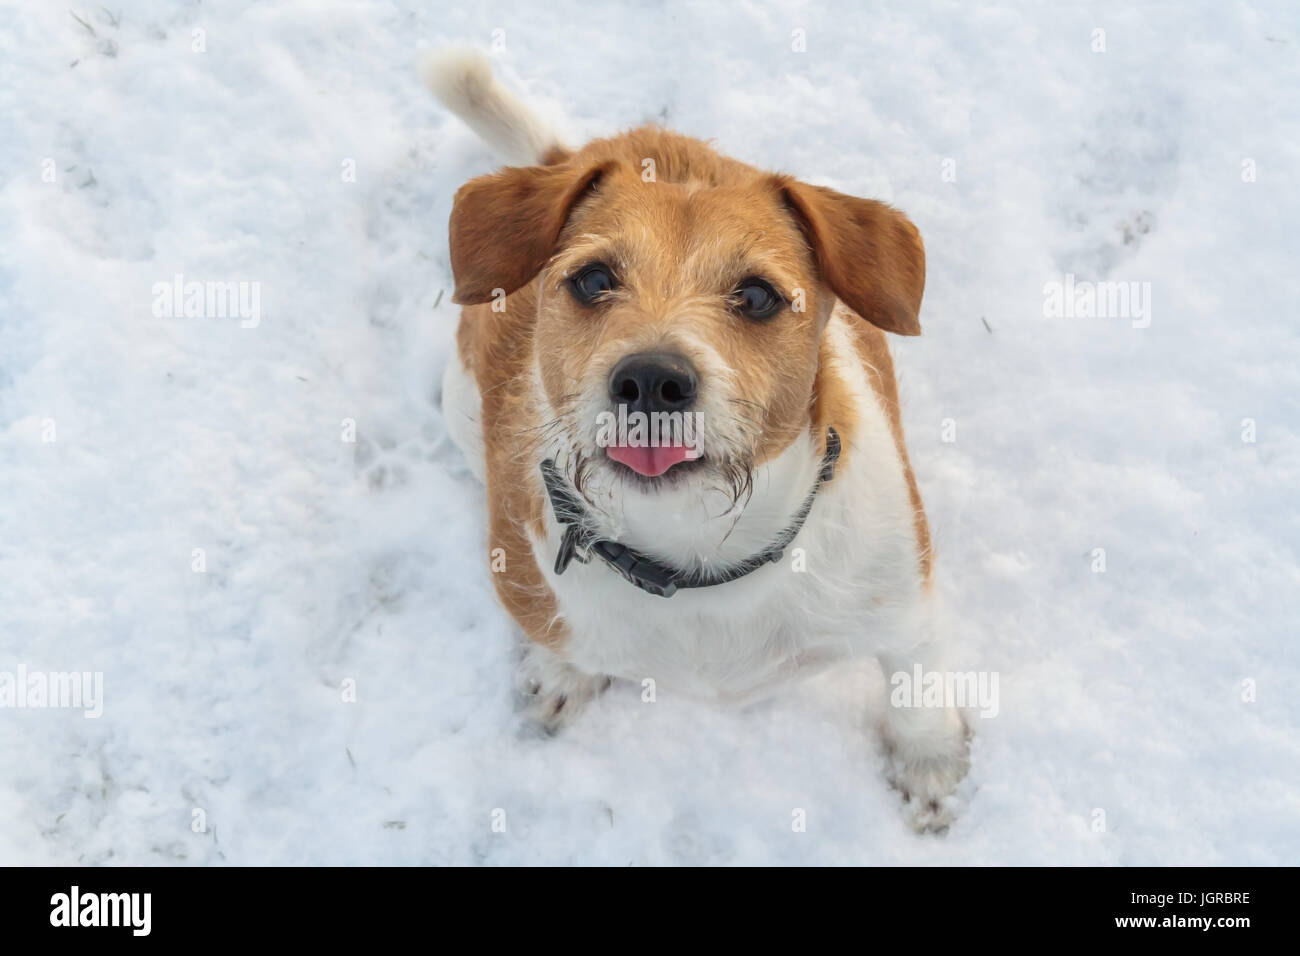 Jack Russell dog sat in the snow with his tongue out catching snow flakes Stock Photo